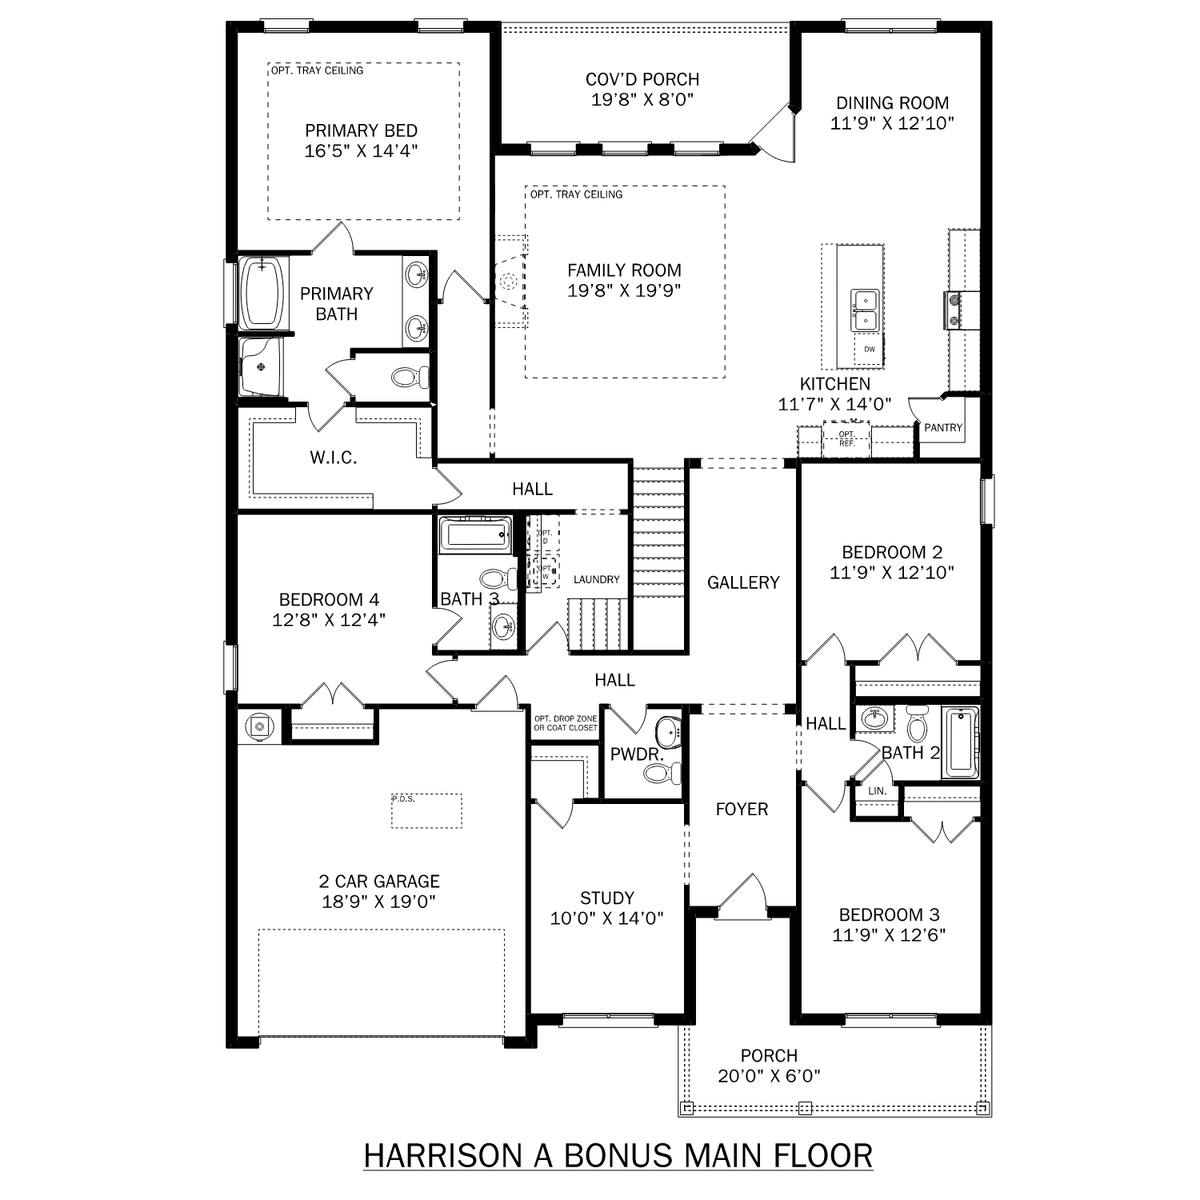 1 - The Harrison with Bonus buildable floor plan layout in Davidson Homes' Creekside community.